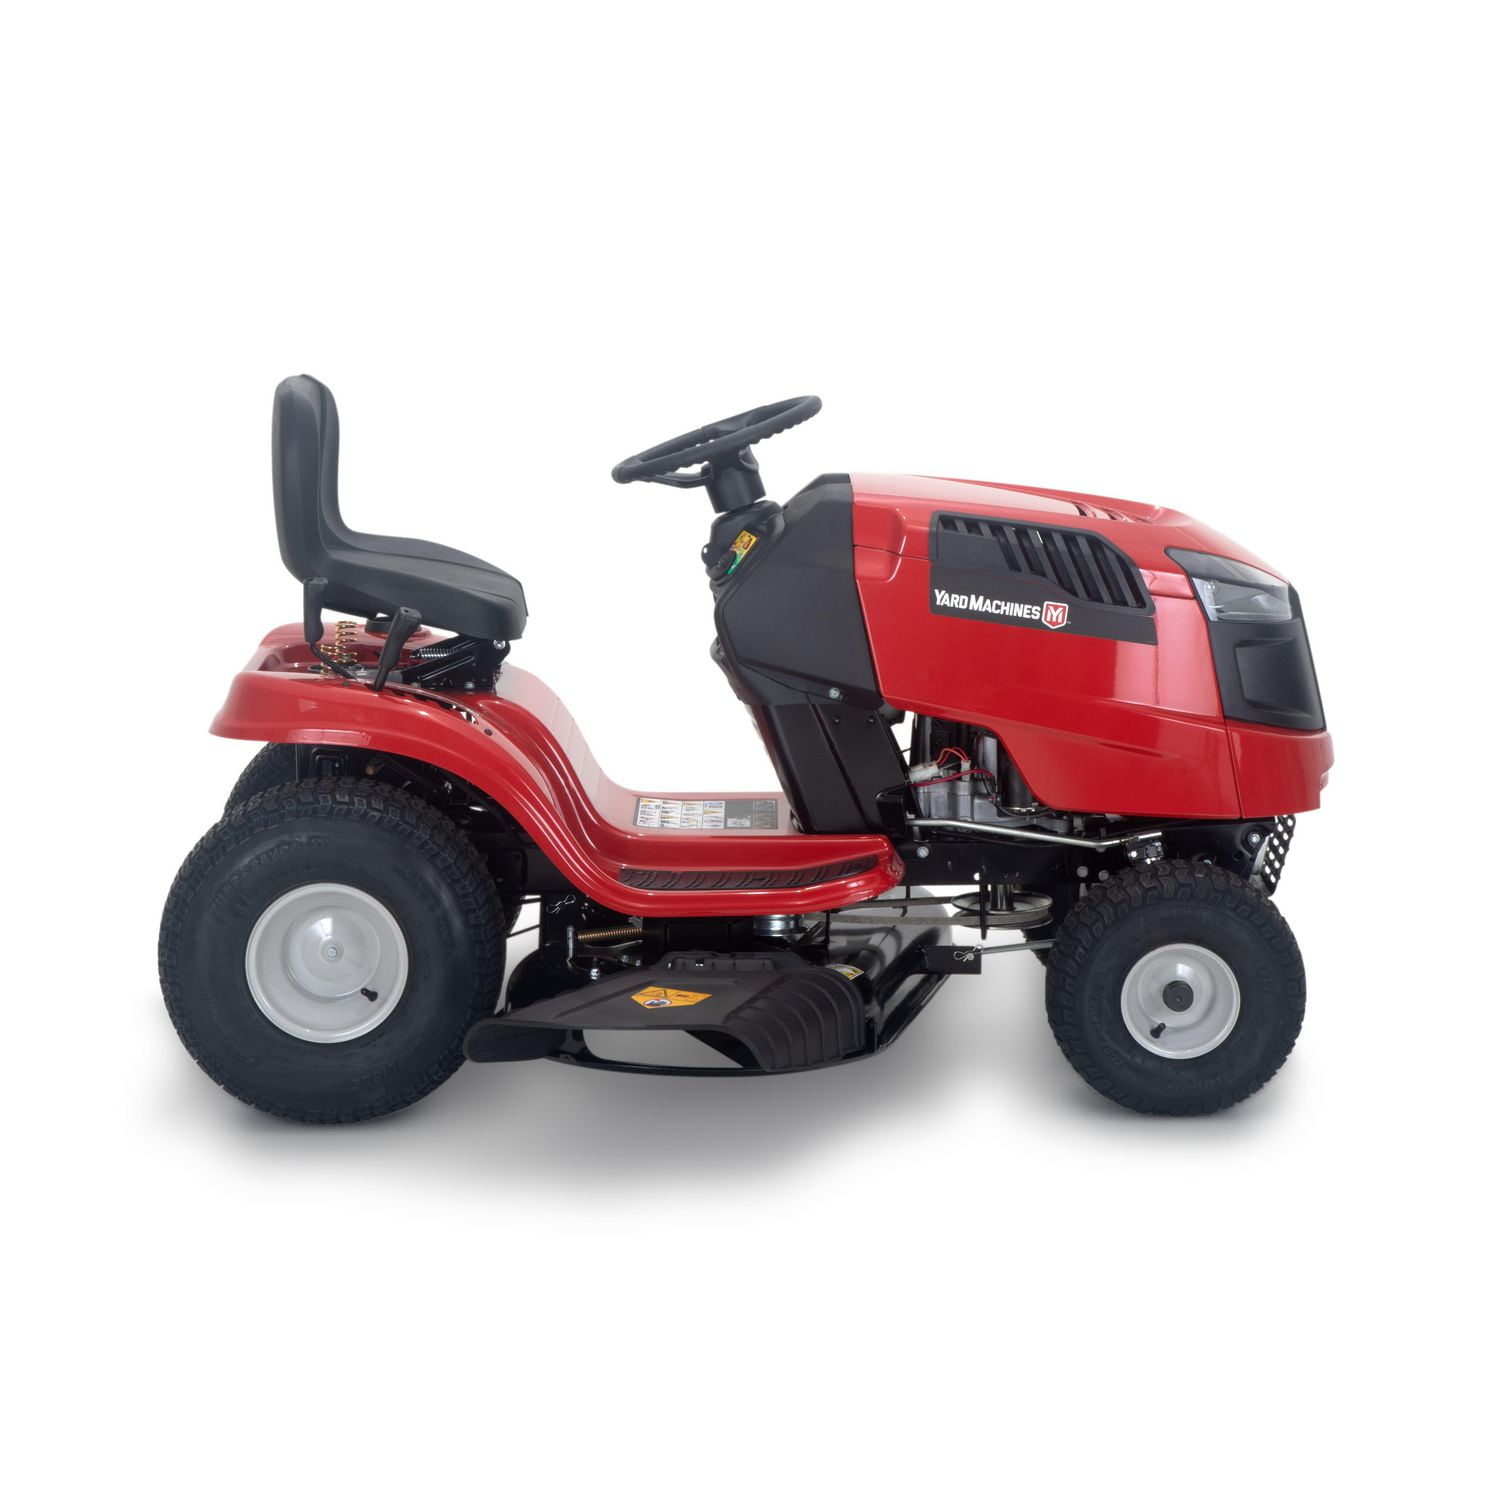 Reelmaster T4240 Heavy Duty 5 Unit Reelmower - Parkland - Lawn & Land  Maintenance and Irrigation Products and Services